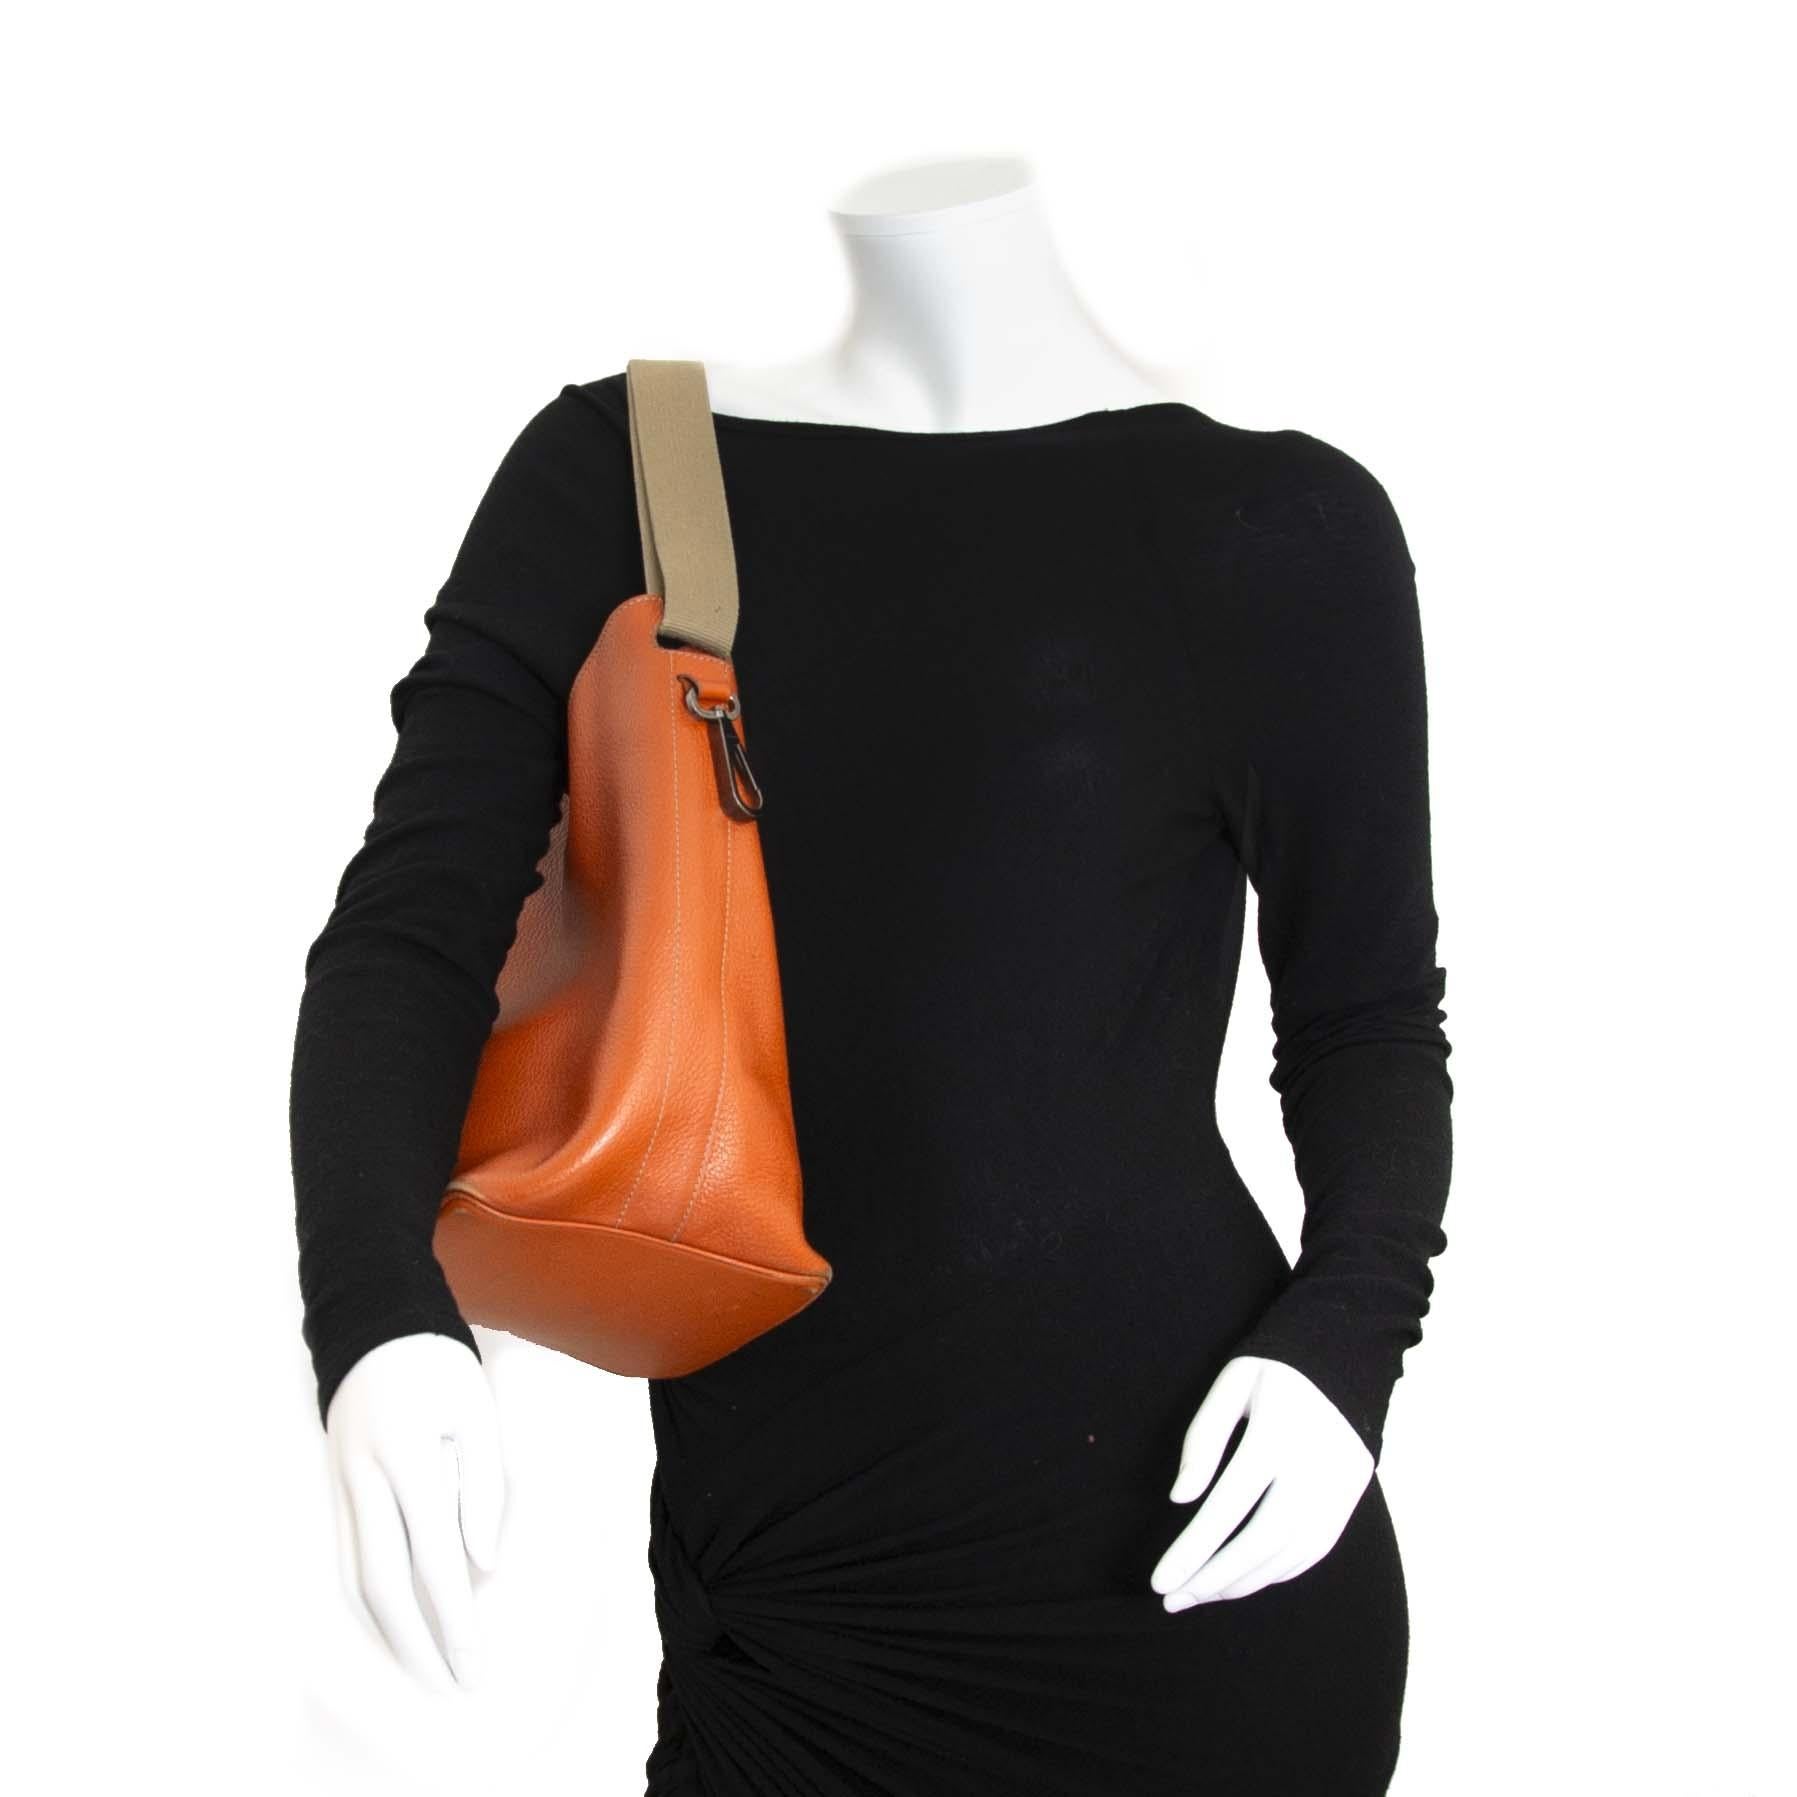 Good condition

Deux De Delvaux Orange Bucket Bag

The bucket bag was big in the 1970's, but nowadays the bucket bag is back in business. These bags are so practical and easy to carry that you just need to have one in your life!
This gorgeous